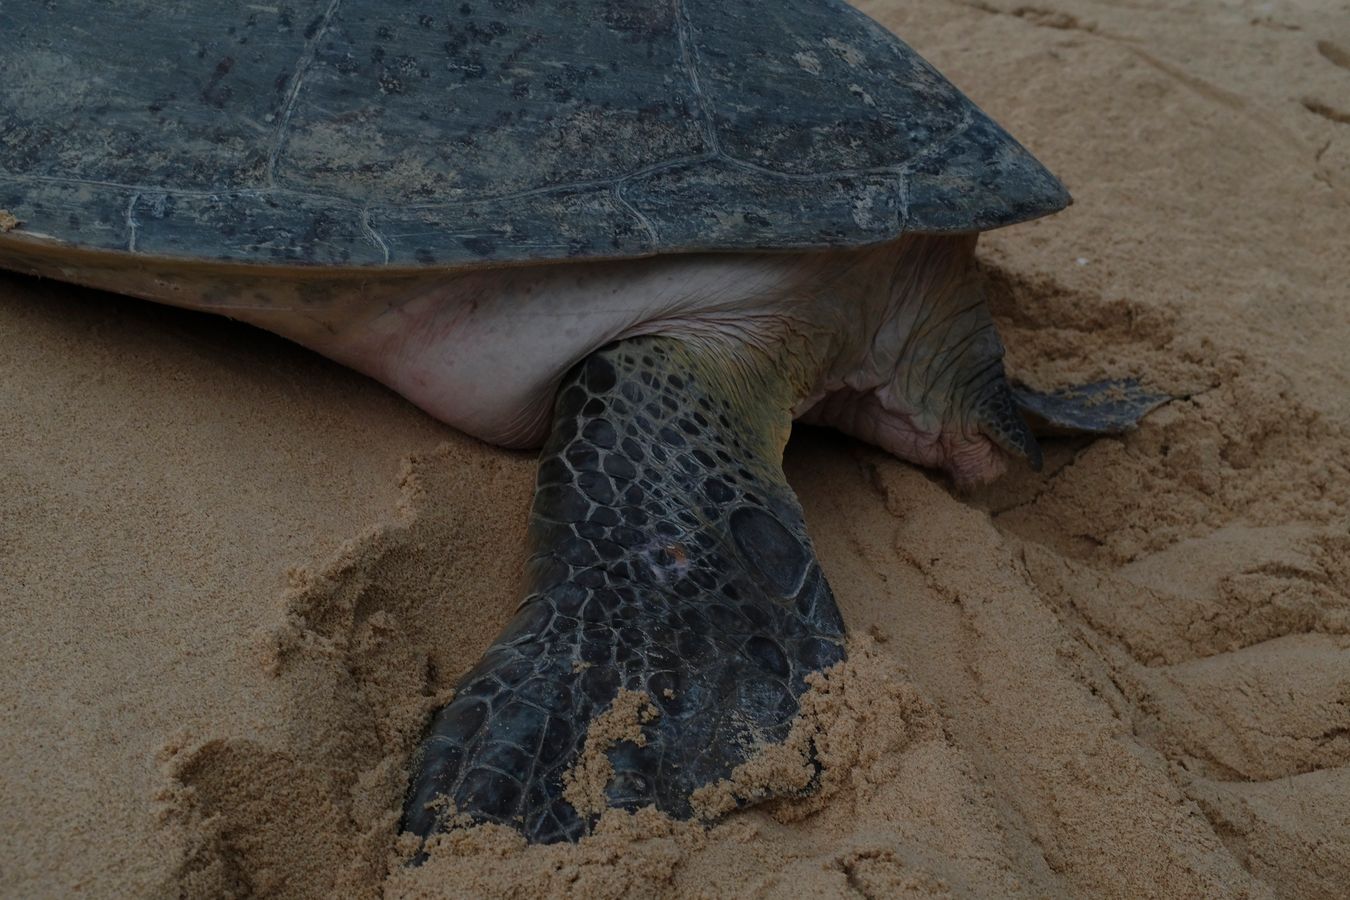 Close view of hind leg and tail of green turtle.